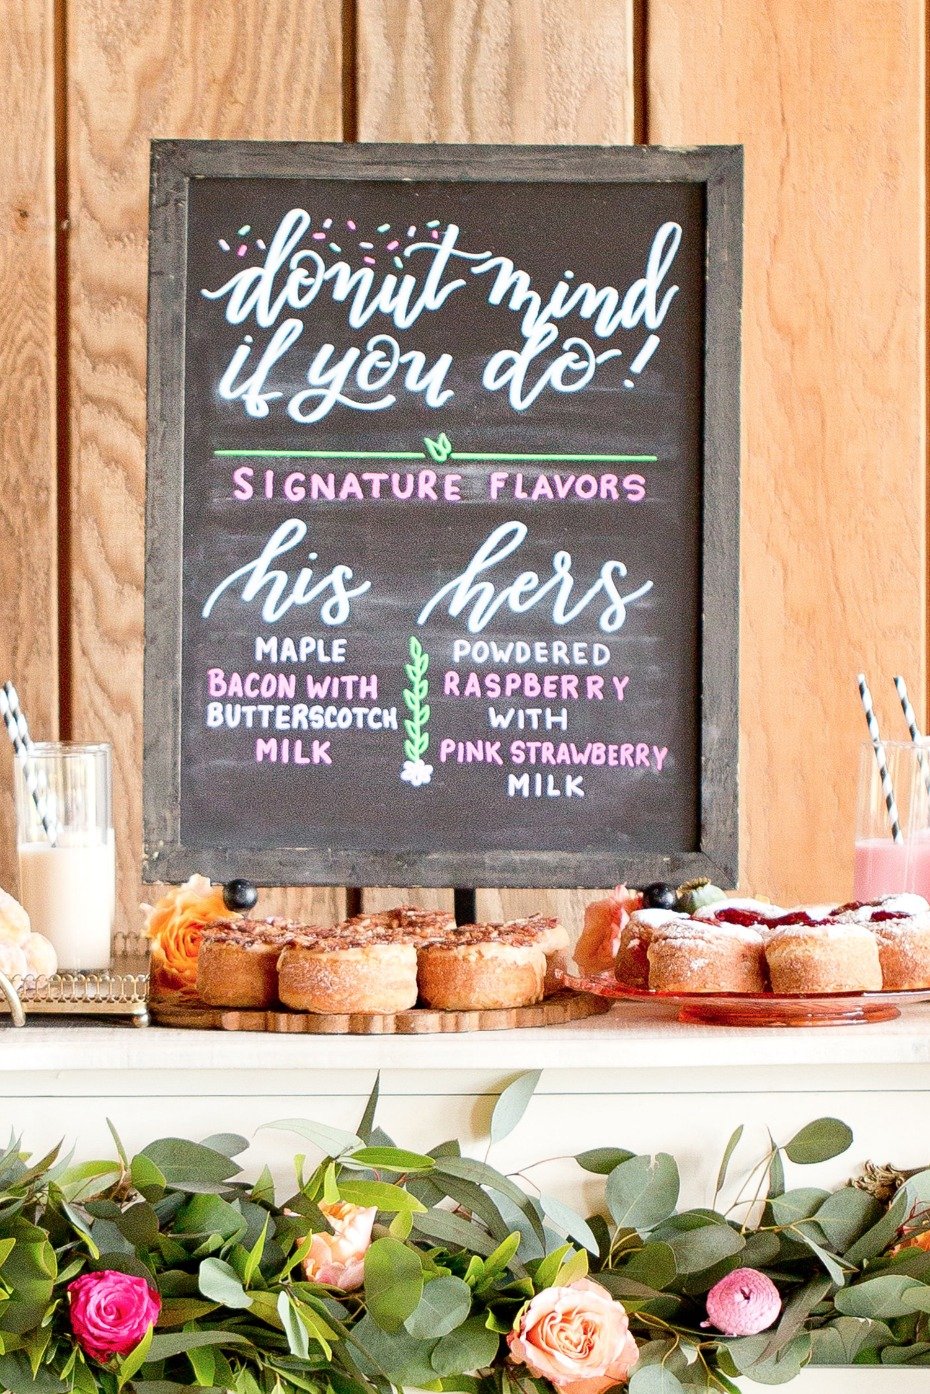 His and Her Donut buffet sign